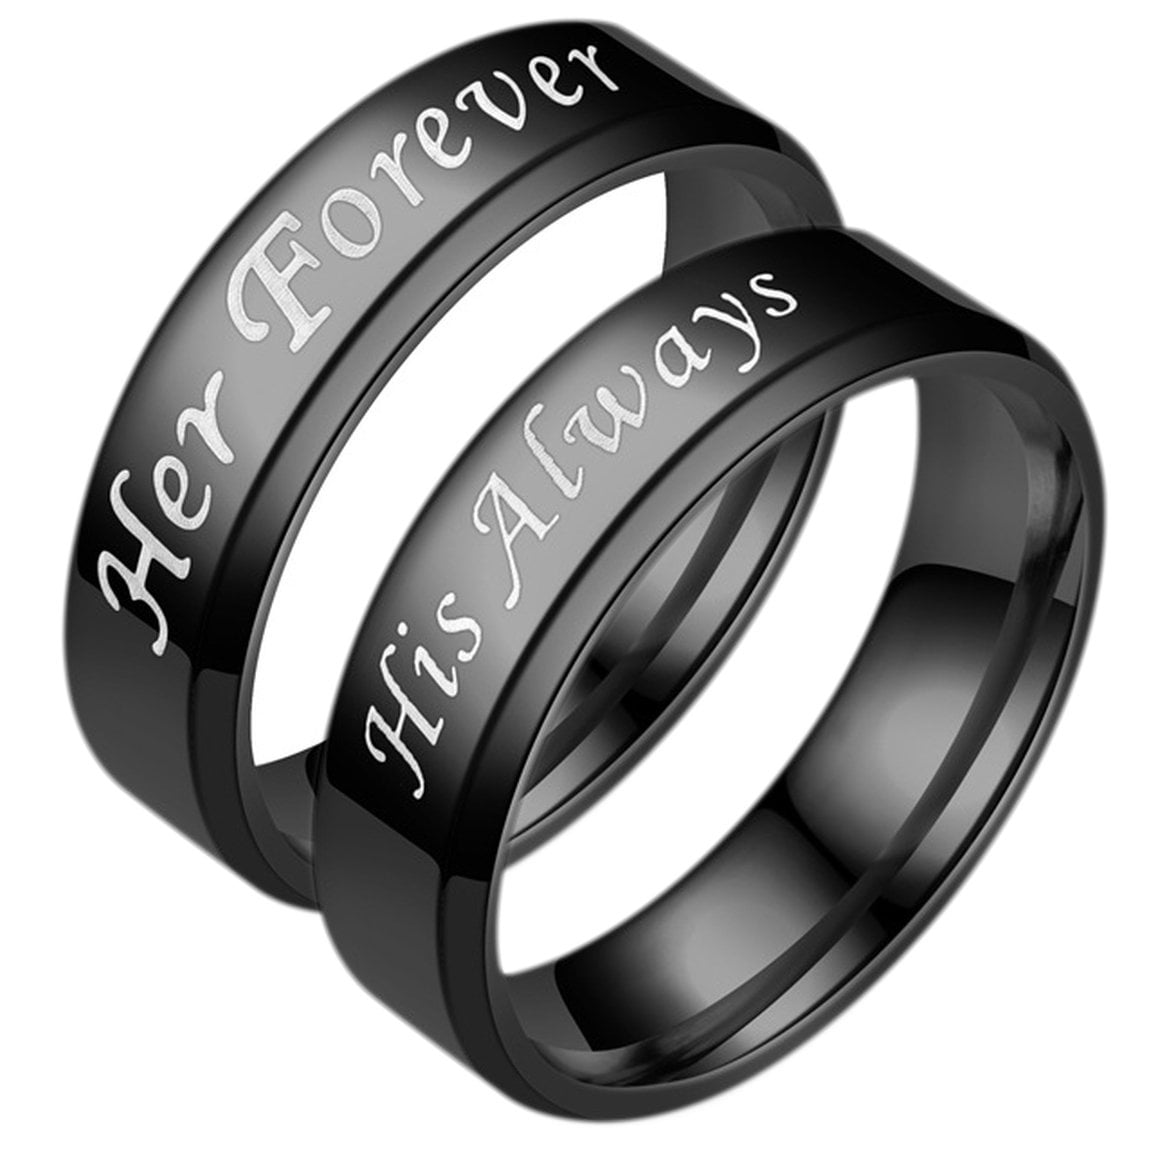 KY Jewelry Engraved Love Couples Ring Stainless Steel Lovers Rings Wedding Engagement for Him & Her Set 